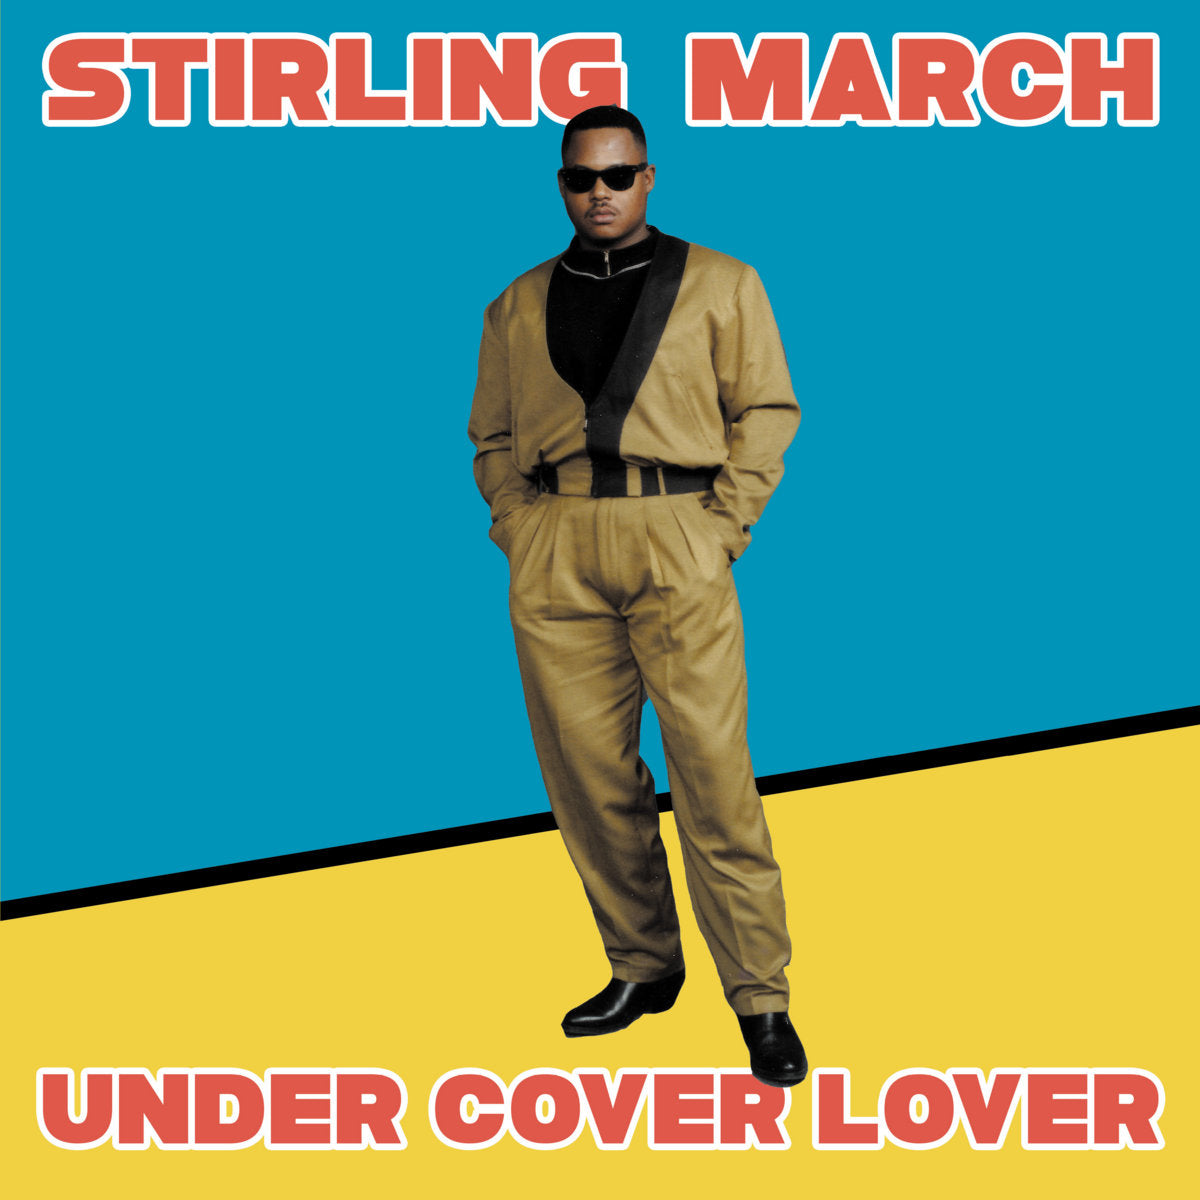 Under Cover Lover (New 12")